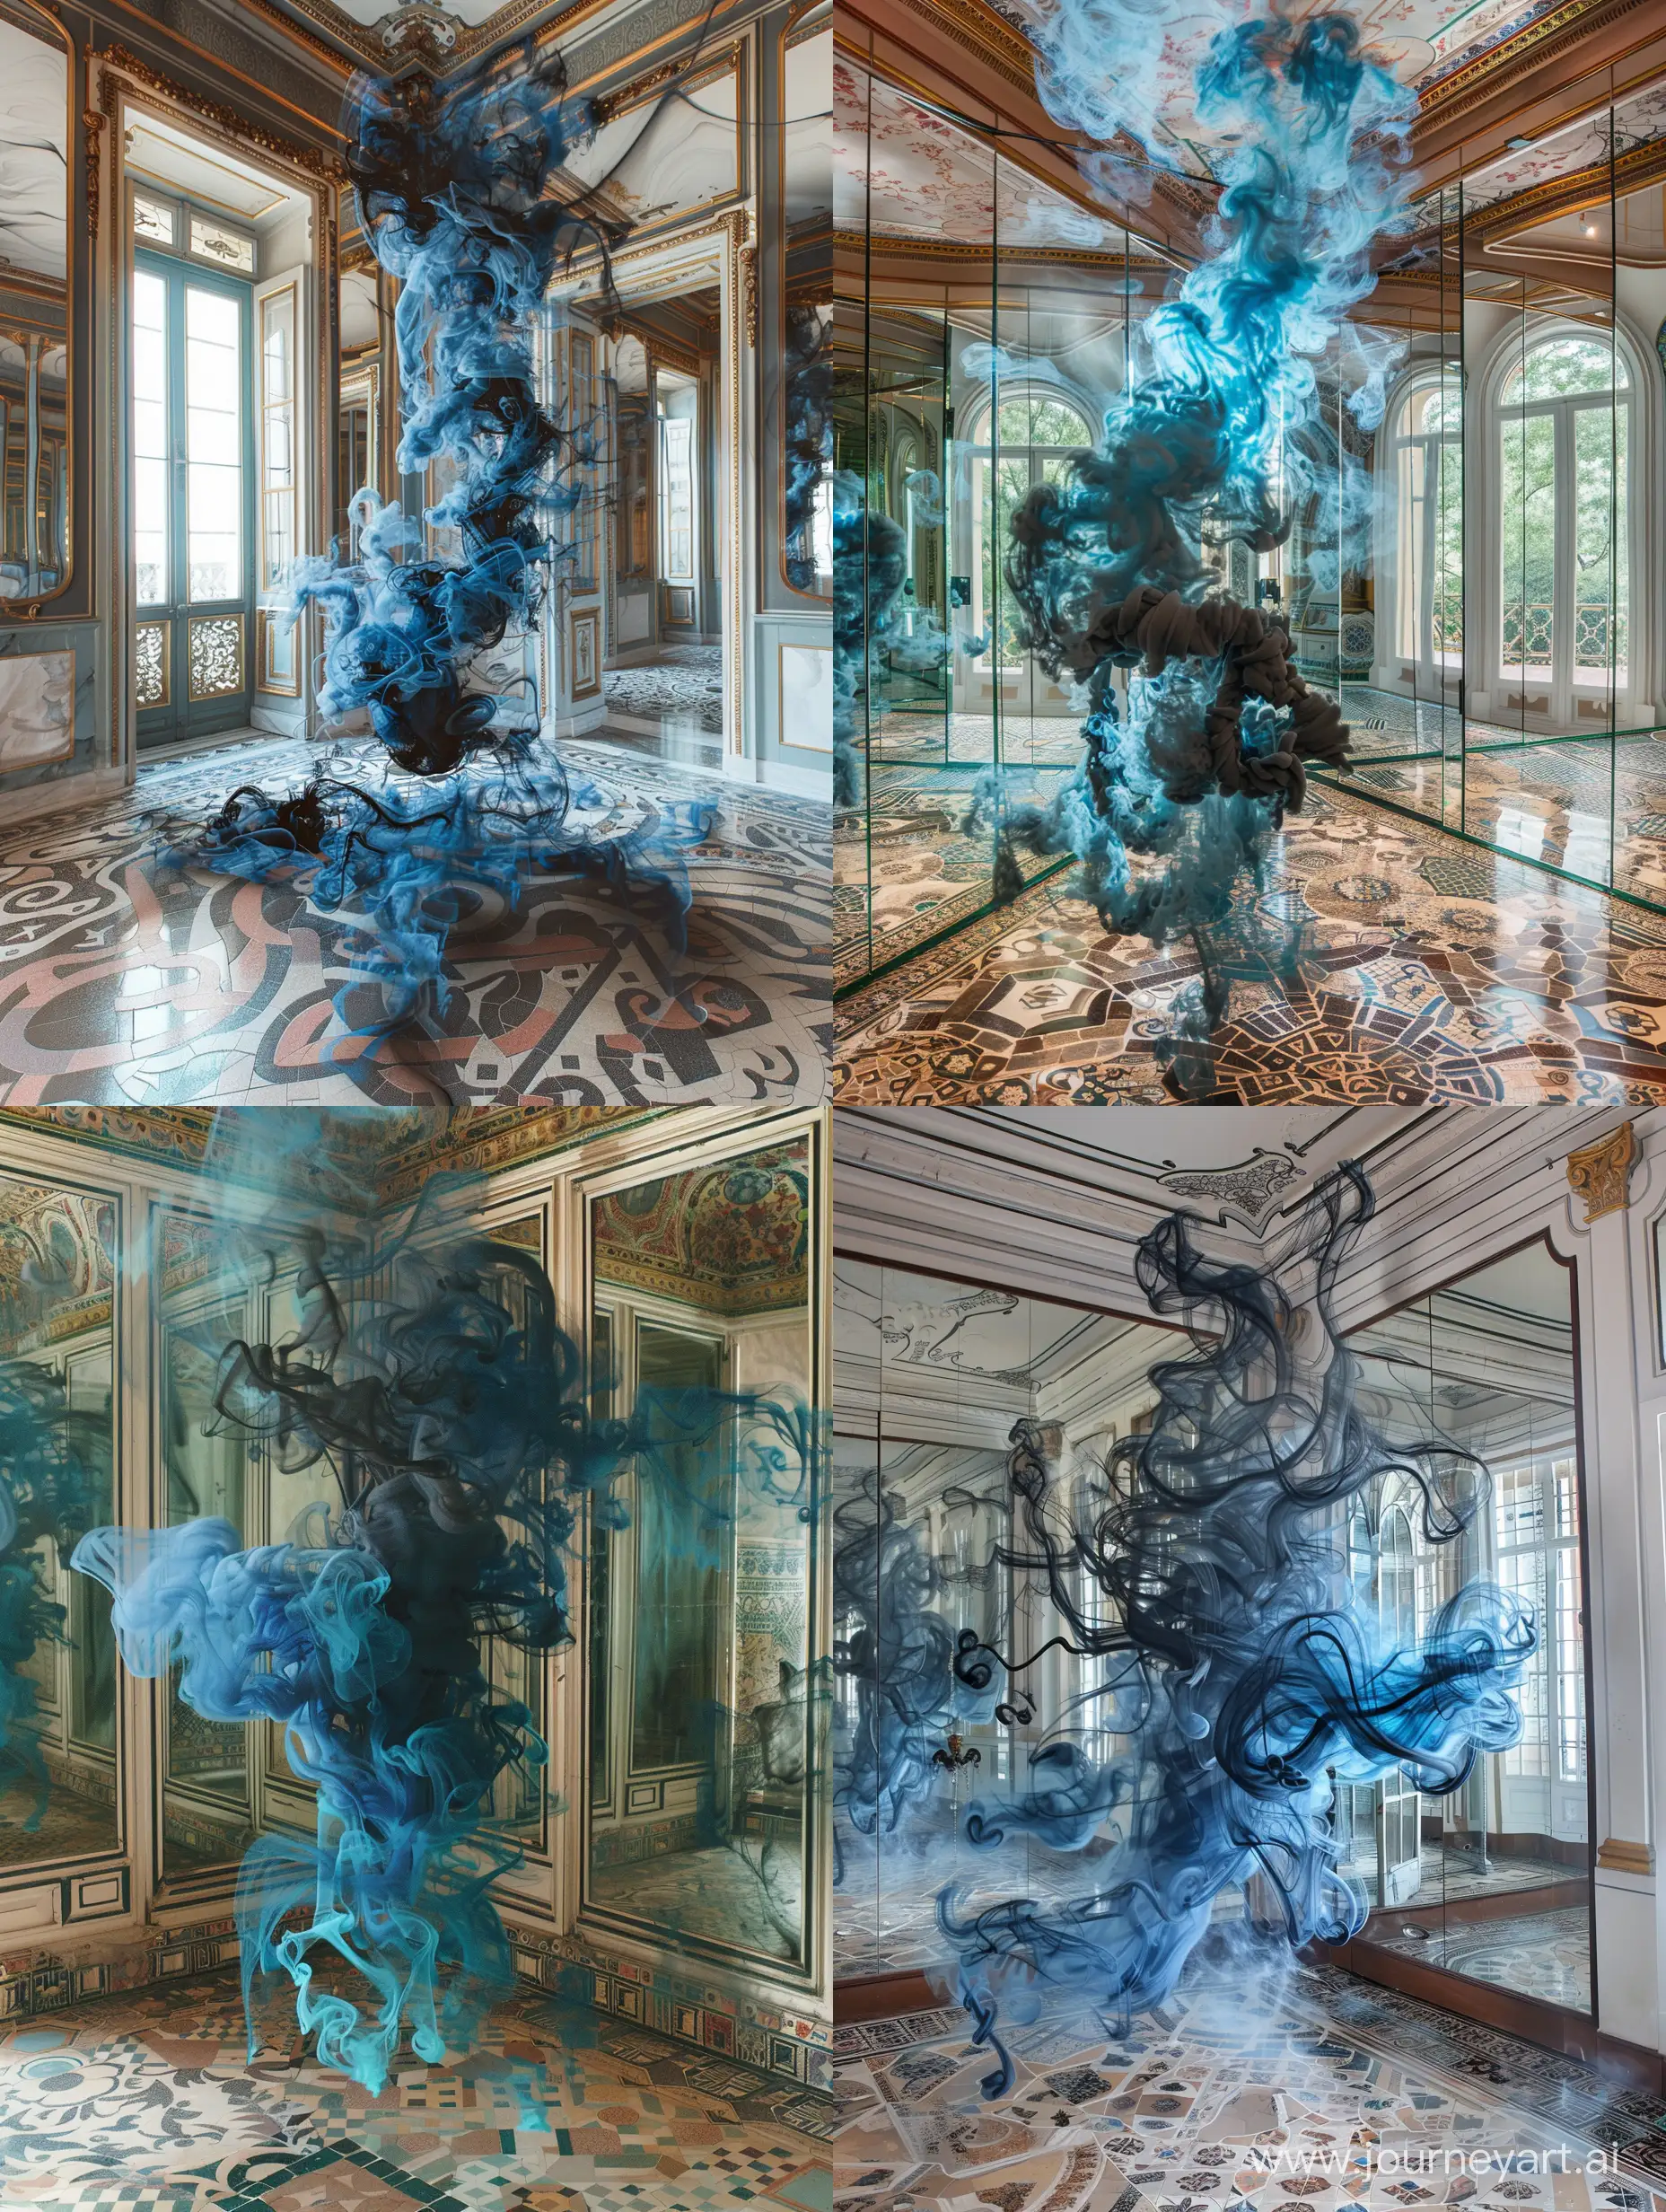 An unusual intricate being made entirely of blue and black smoke hovers inside of a room with mirror walls and an intricate tile mosaic floor